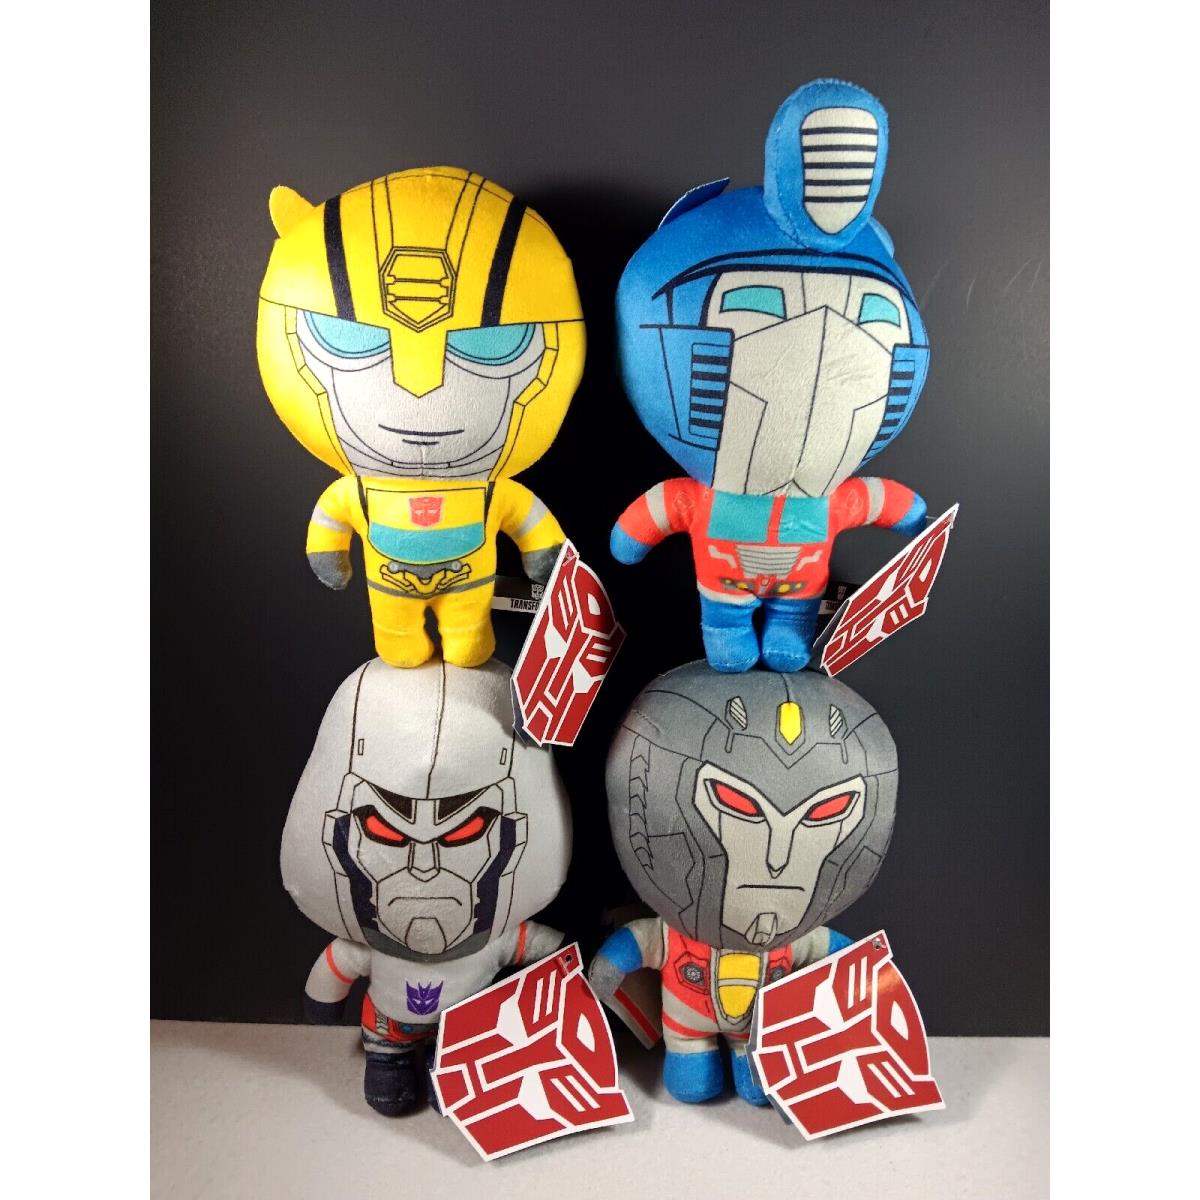 Transformers Set of 4 Universal Pictures Optimus Prime Plush Toy Doll Hasbro 7